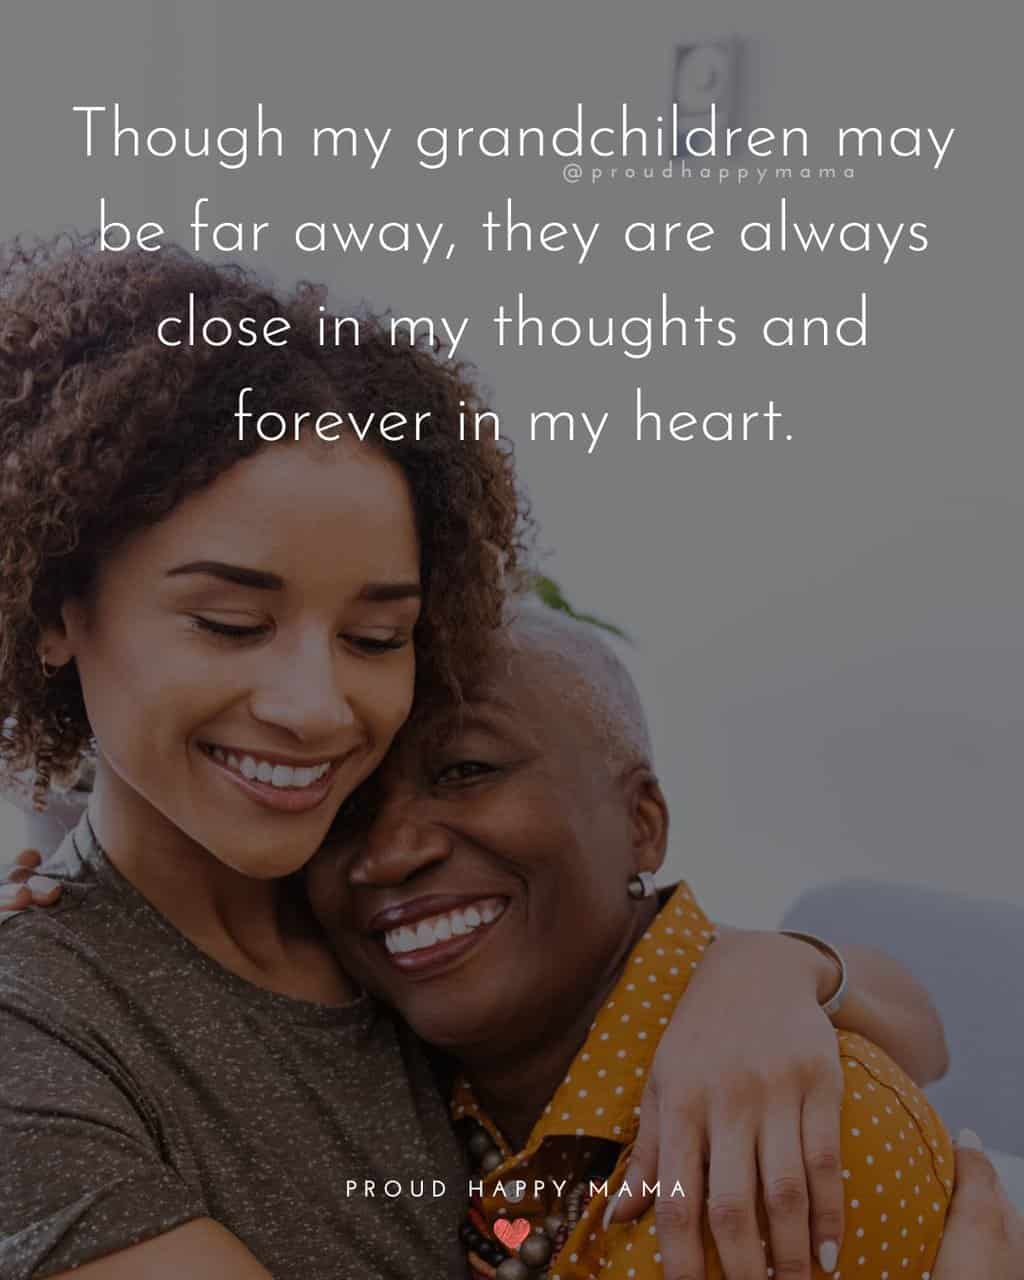 Missing grandchildren quotes. Though my grandchildren may be far away, they are always close in my thoughts and forever in my heart.